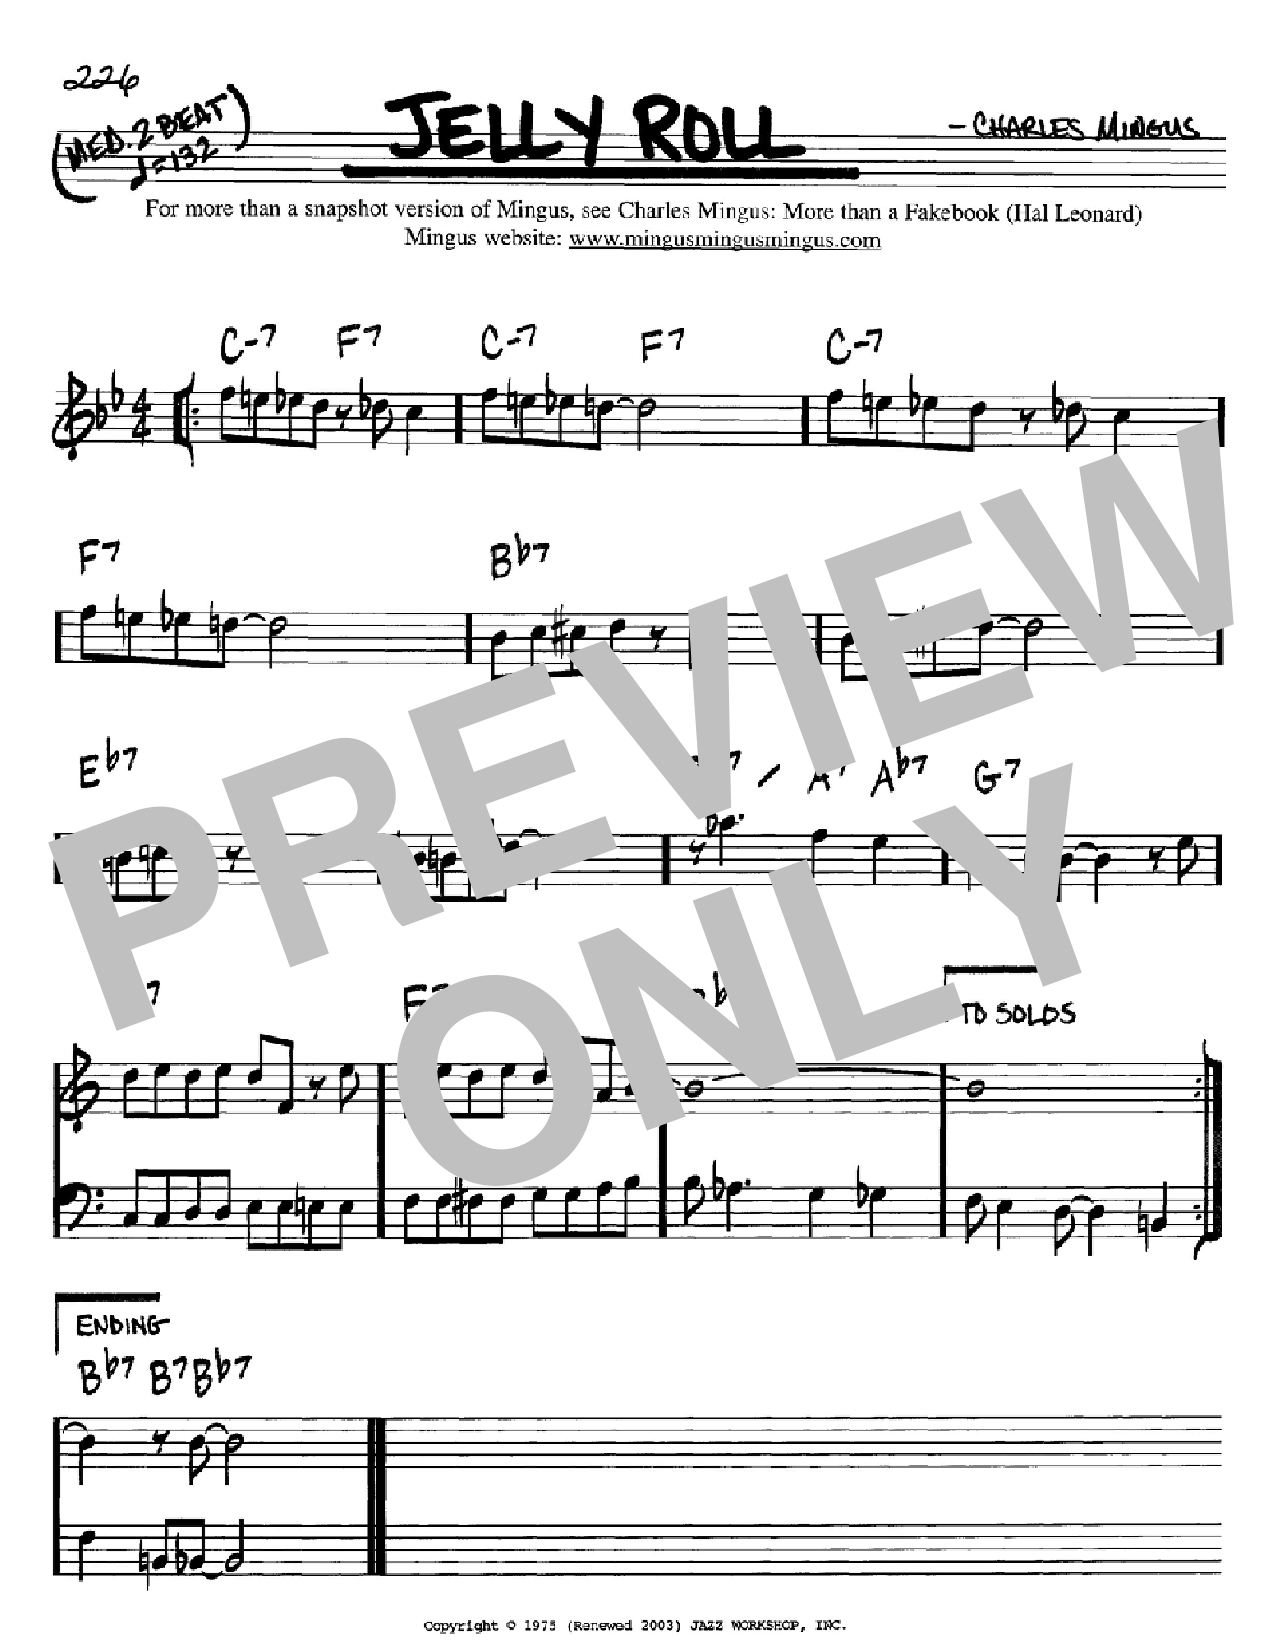 Download Charles Mingus Jelly Roll Sheet Music